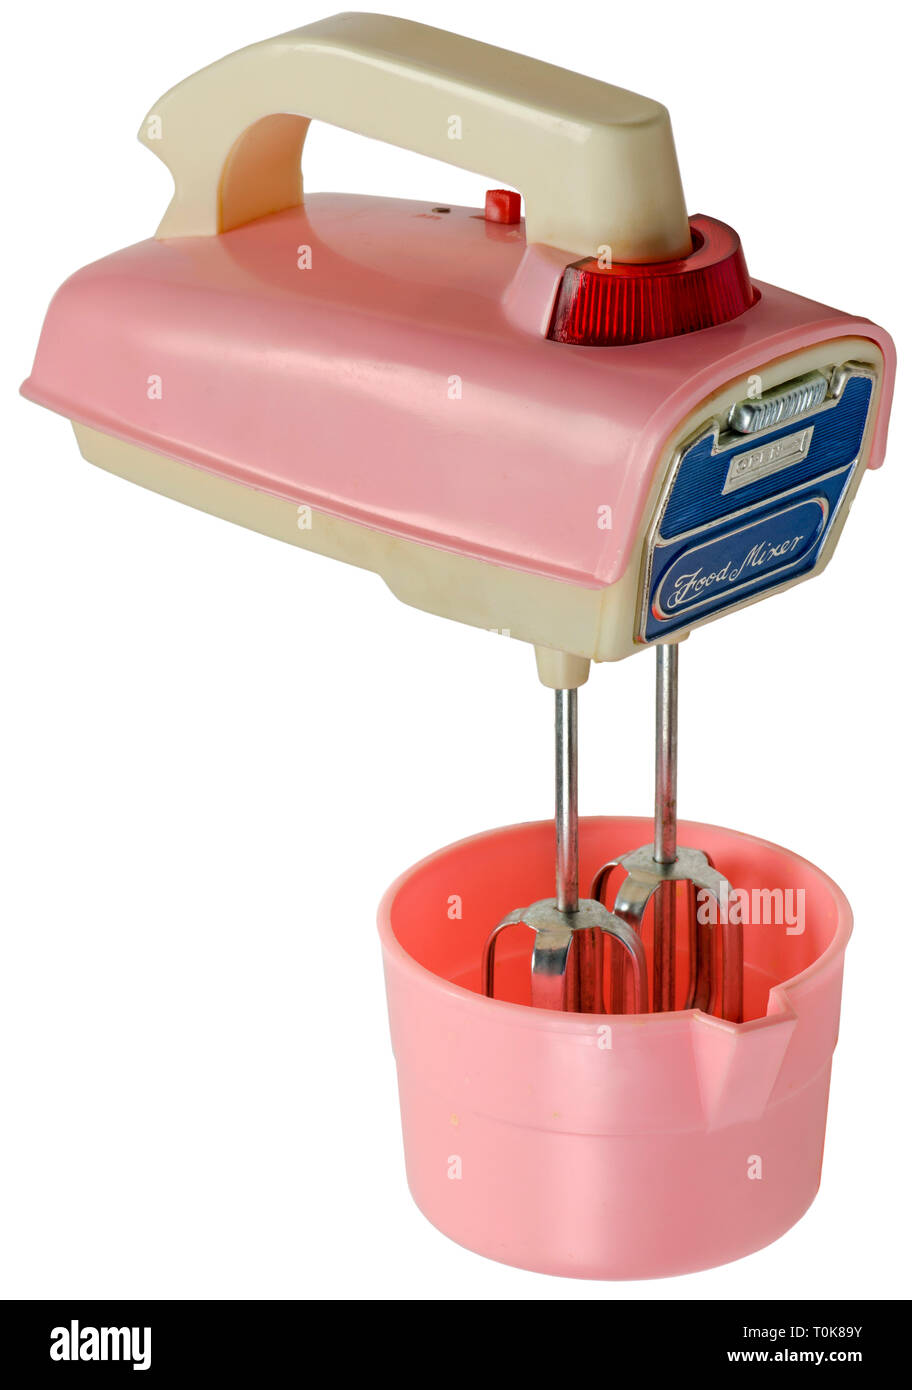 toys, hand mixer with mixing bowl, operative, battery-operated, electrical mixer, design in the style typical American kitchen appliances of the fifties, Germany, circa 1959, Additional-Rights-Clearance-Info-Not-Available Stock Photo